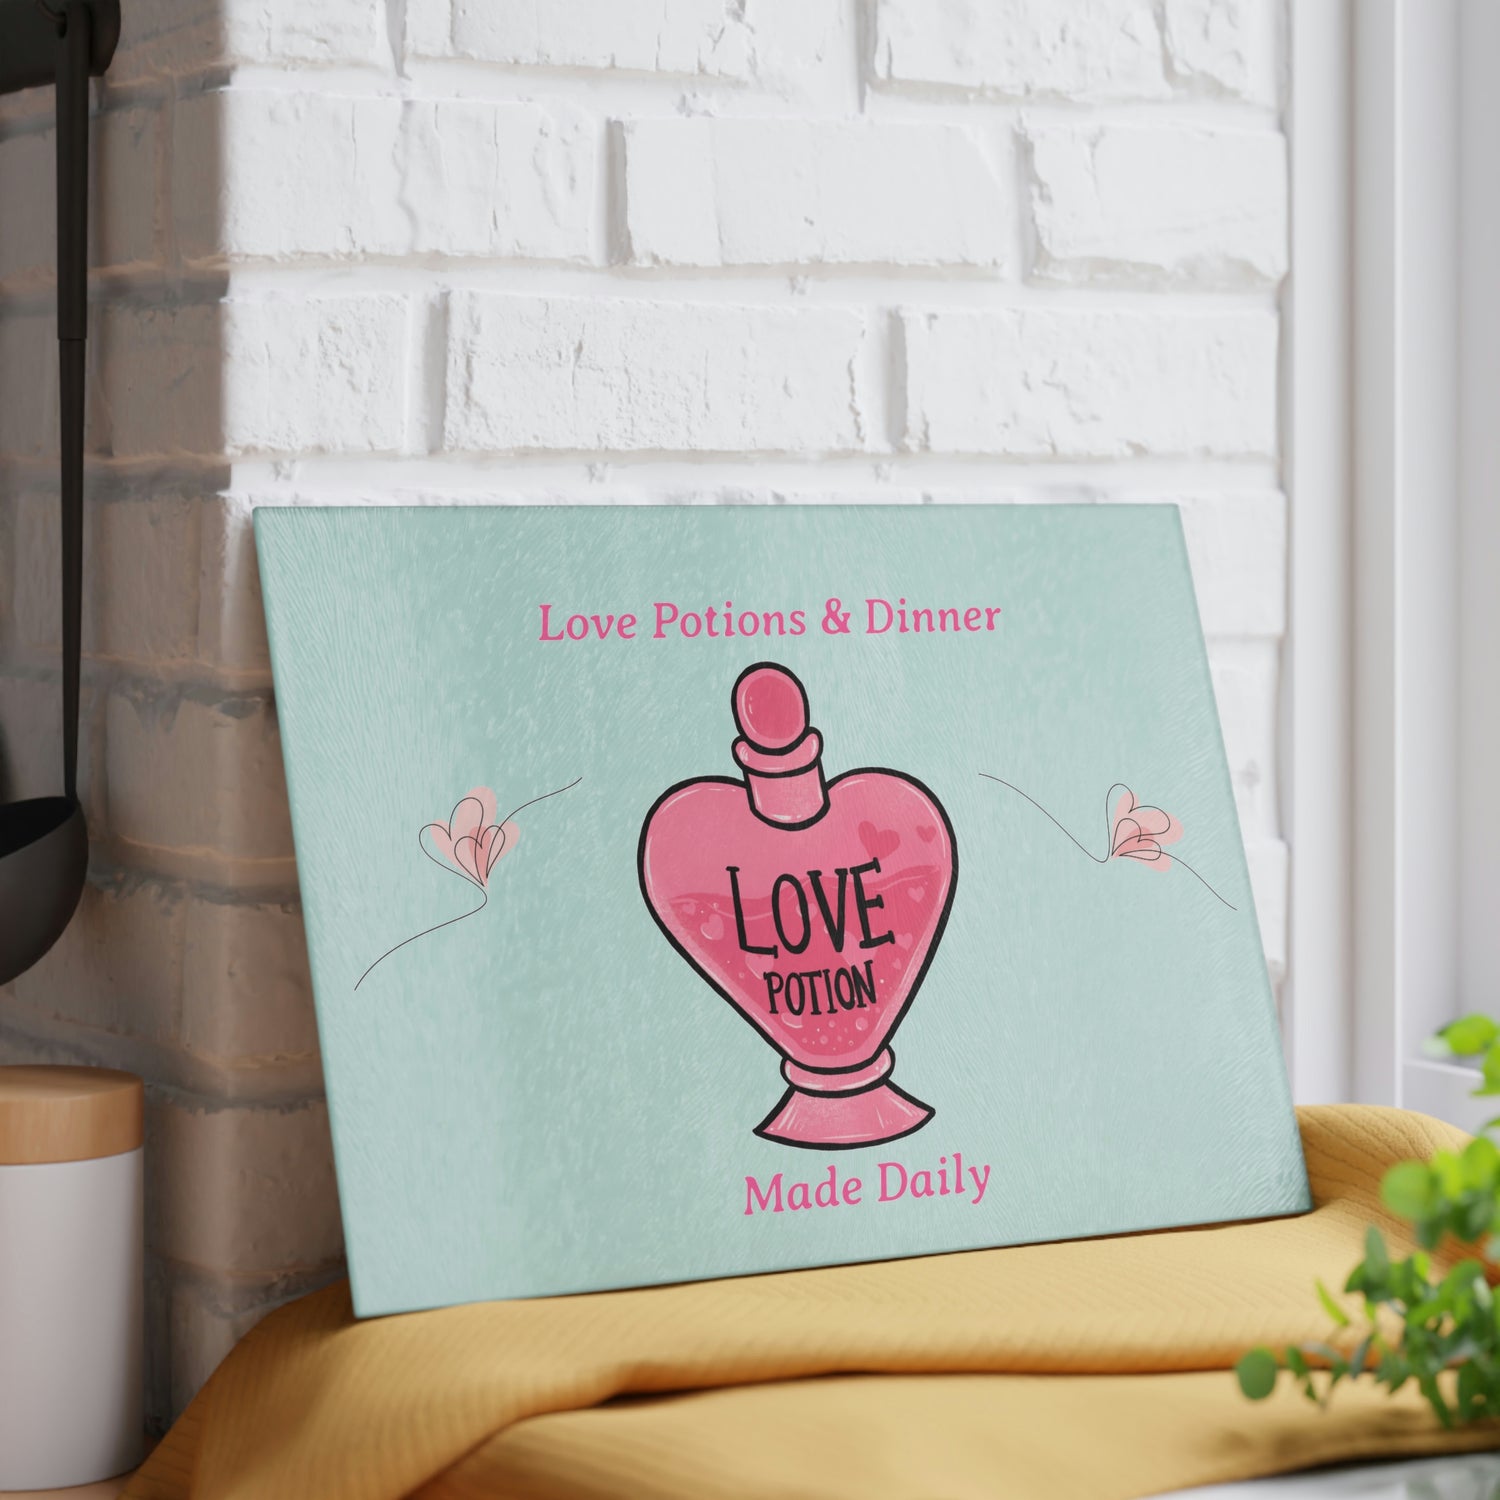 Love & Dinner Glass Cutting Board - Witchy Kitchens